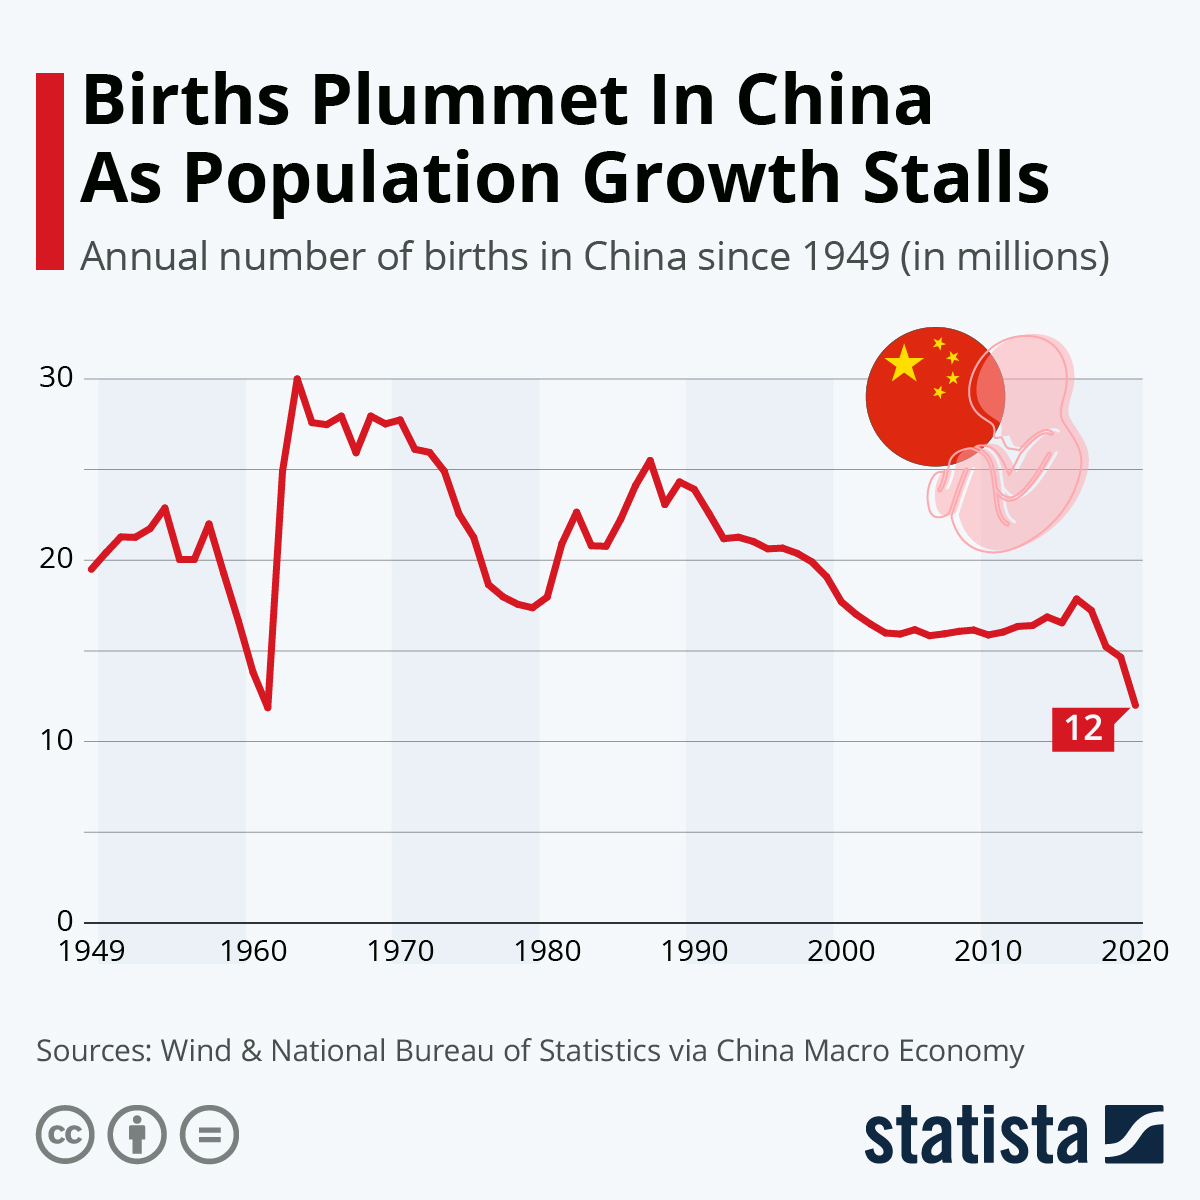 Births Plummet In China As Population Growth Stalls